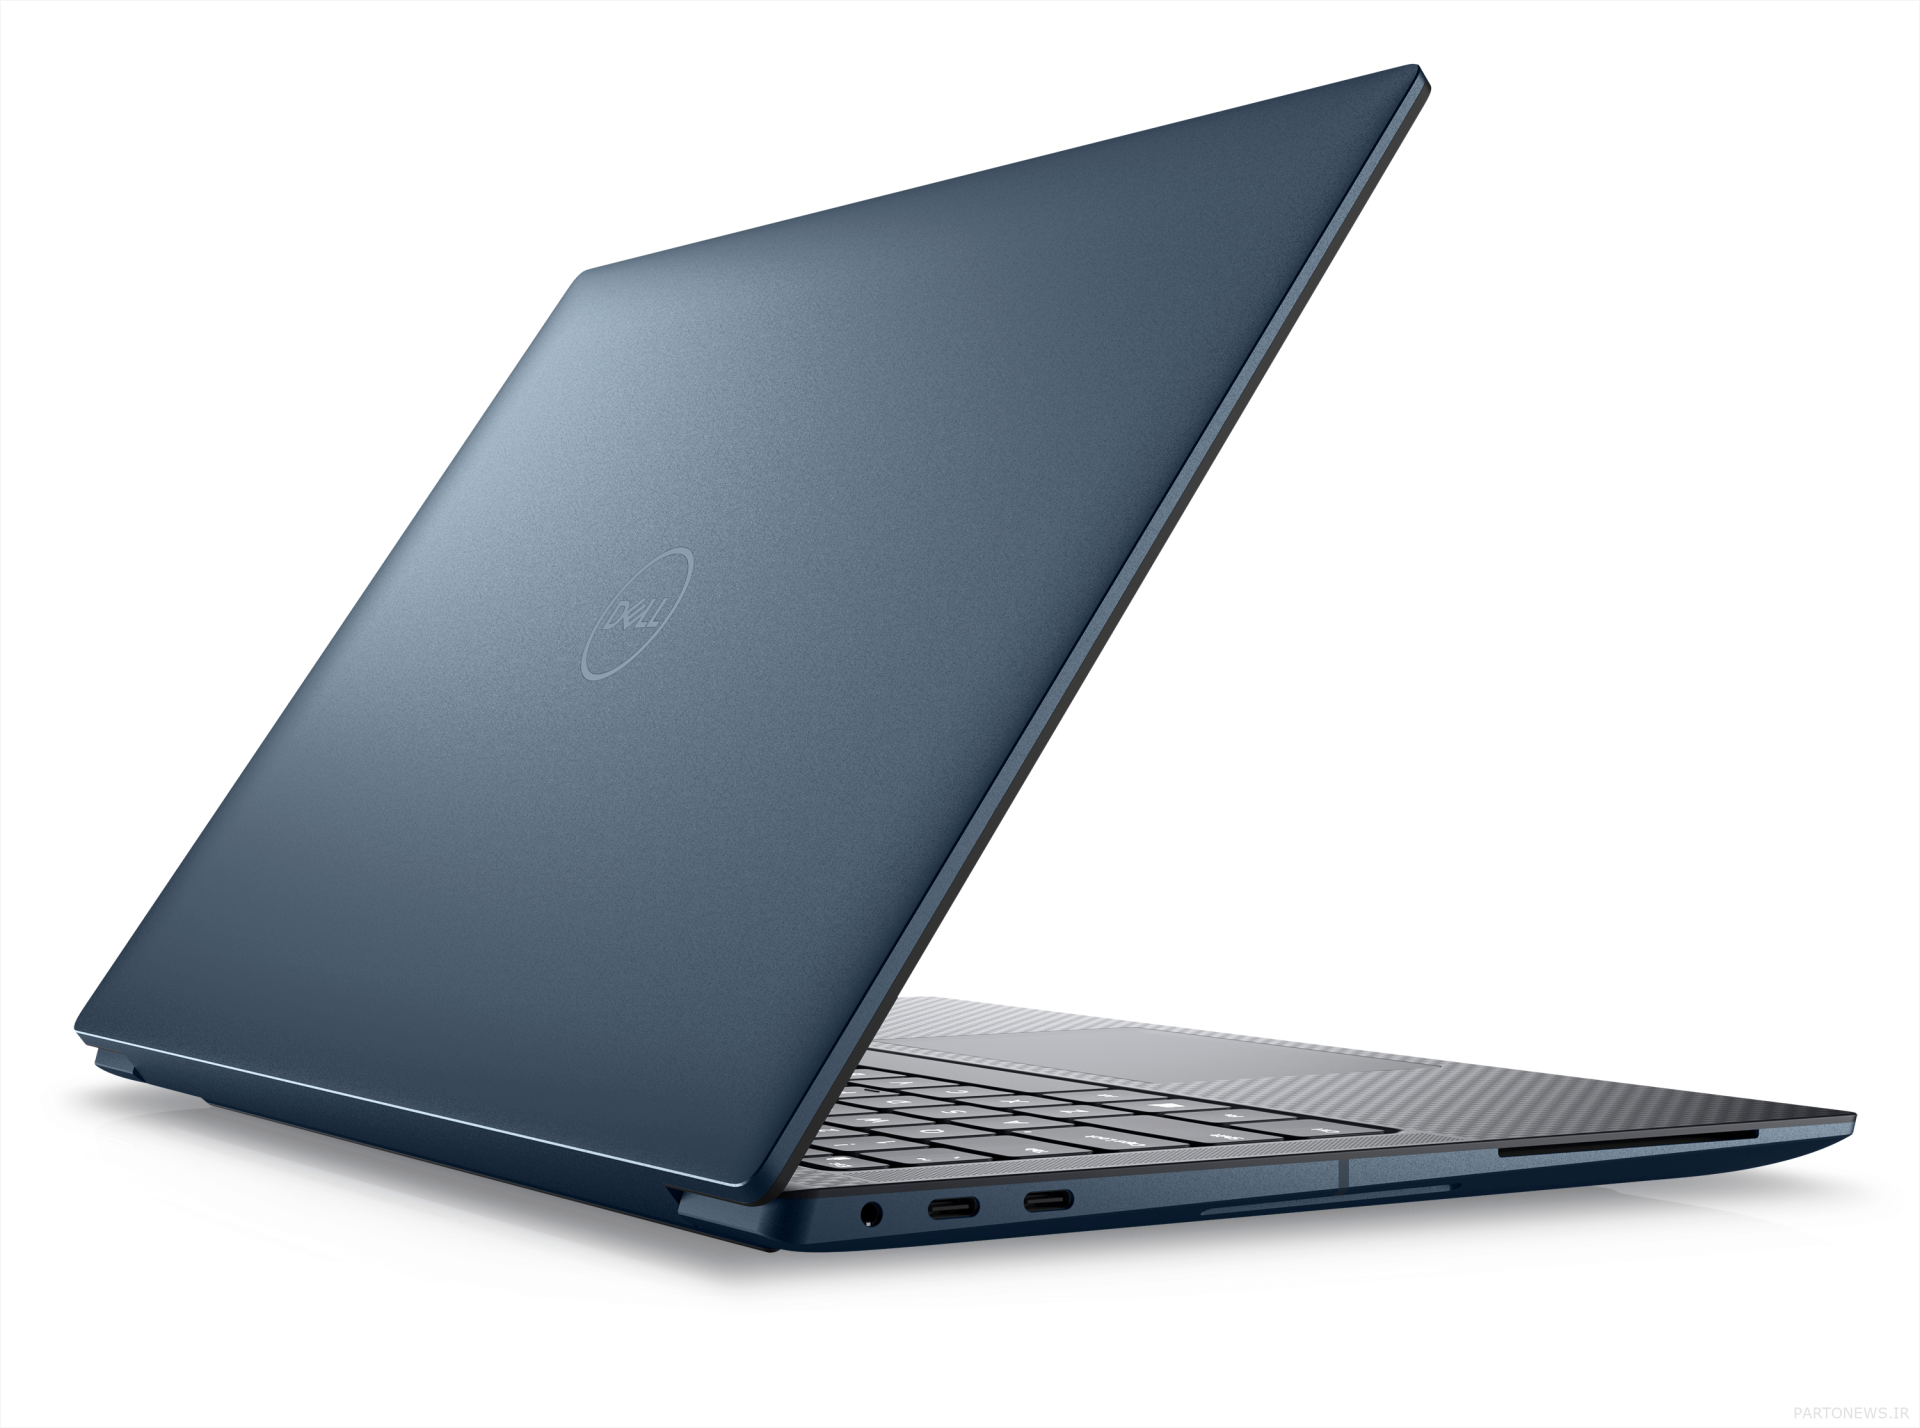 The new Dell Precision series of laptops was introduced.